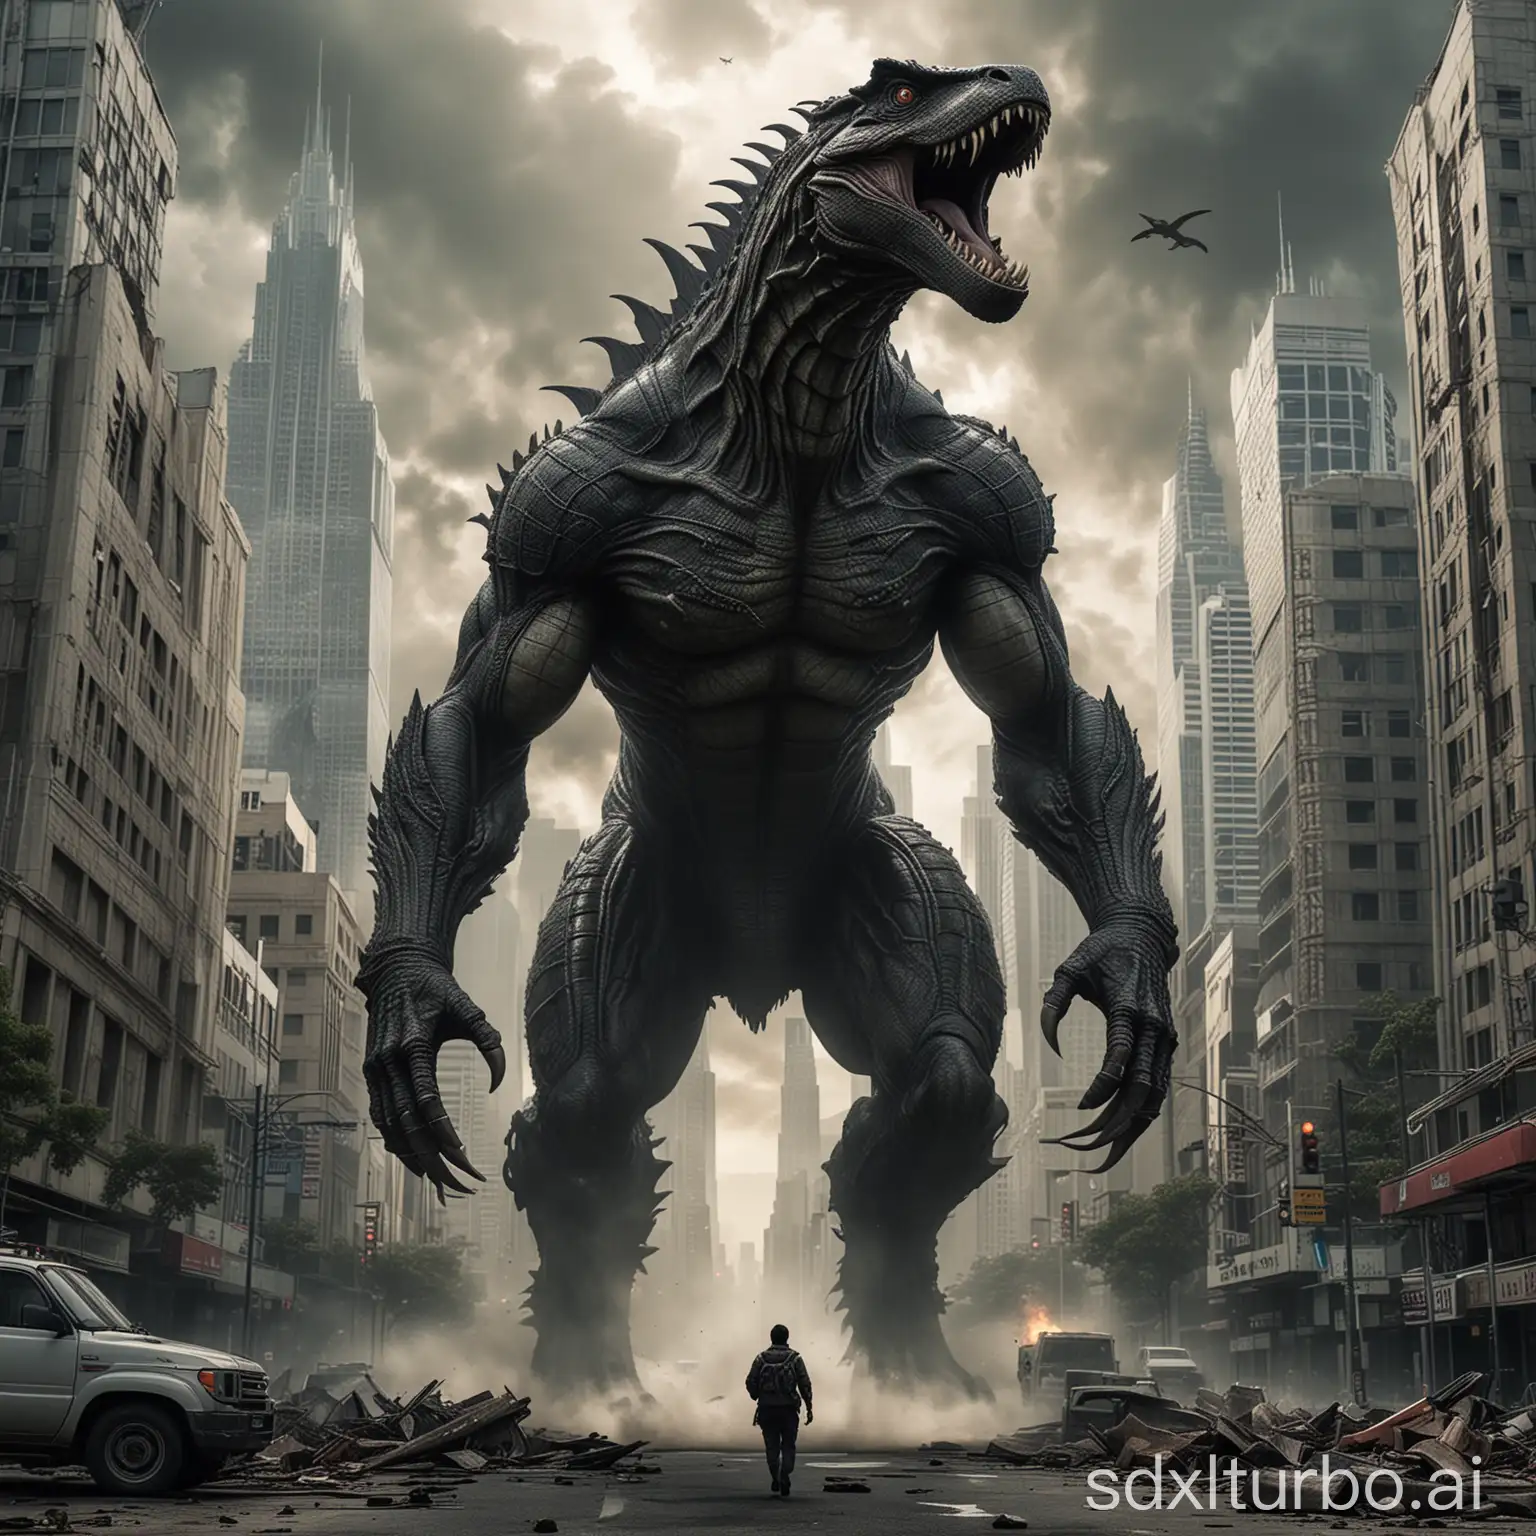 High resolution, dynamic, photorealistic kaiju with the head of a komodo dragon wreaking havoc on Los Angeles. The iconic monster is 300 feet tall, towering over the buildings as smoke and debris fill the air. The monster is depicted in the style of Swiss artist H.R. Giger, with intricate organic details covering its body. The thick, muscular monster, with an eerie and unsettling atmosphere that Giger is famous for, is moving between skyscrapers. Energy floats upward from the sides of its mouth. The image is symmetrical, UHD, with extreme detail. The monster has two short muscular arms, gills, and a series of small shark dorsal fins going from its head to its tail. The fins are glowing. The kaiju is smaller than the skyscrapers and is moving between taller skyscrapers. There are lots of skyscrapers. The image is symmetrical. People are running away from the monster. Give it a massively wide torso. Massive legs wider than the torso. Pyramid shaped body, smaller head with massive thick legs.